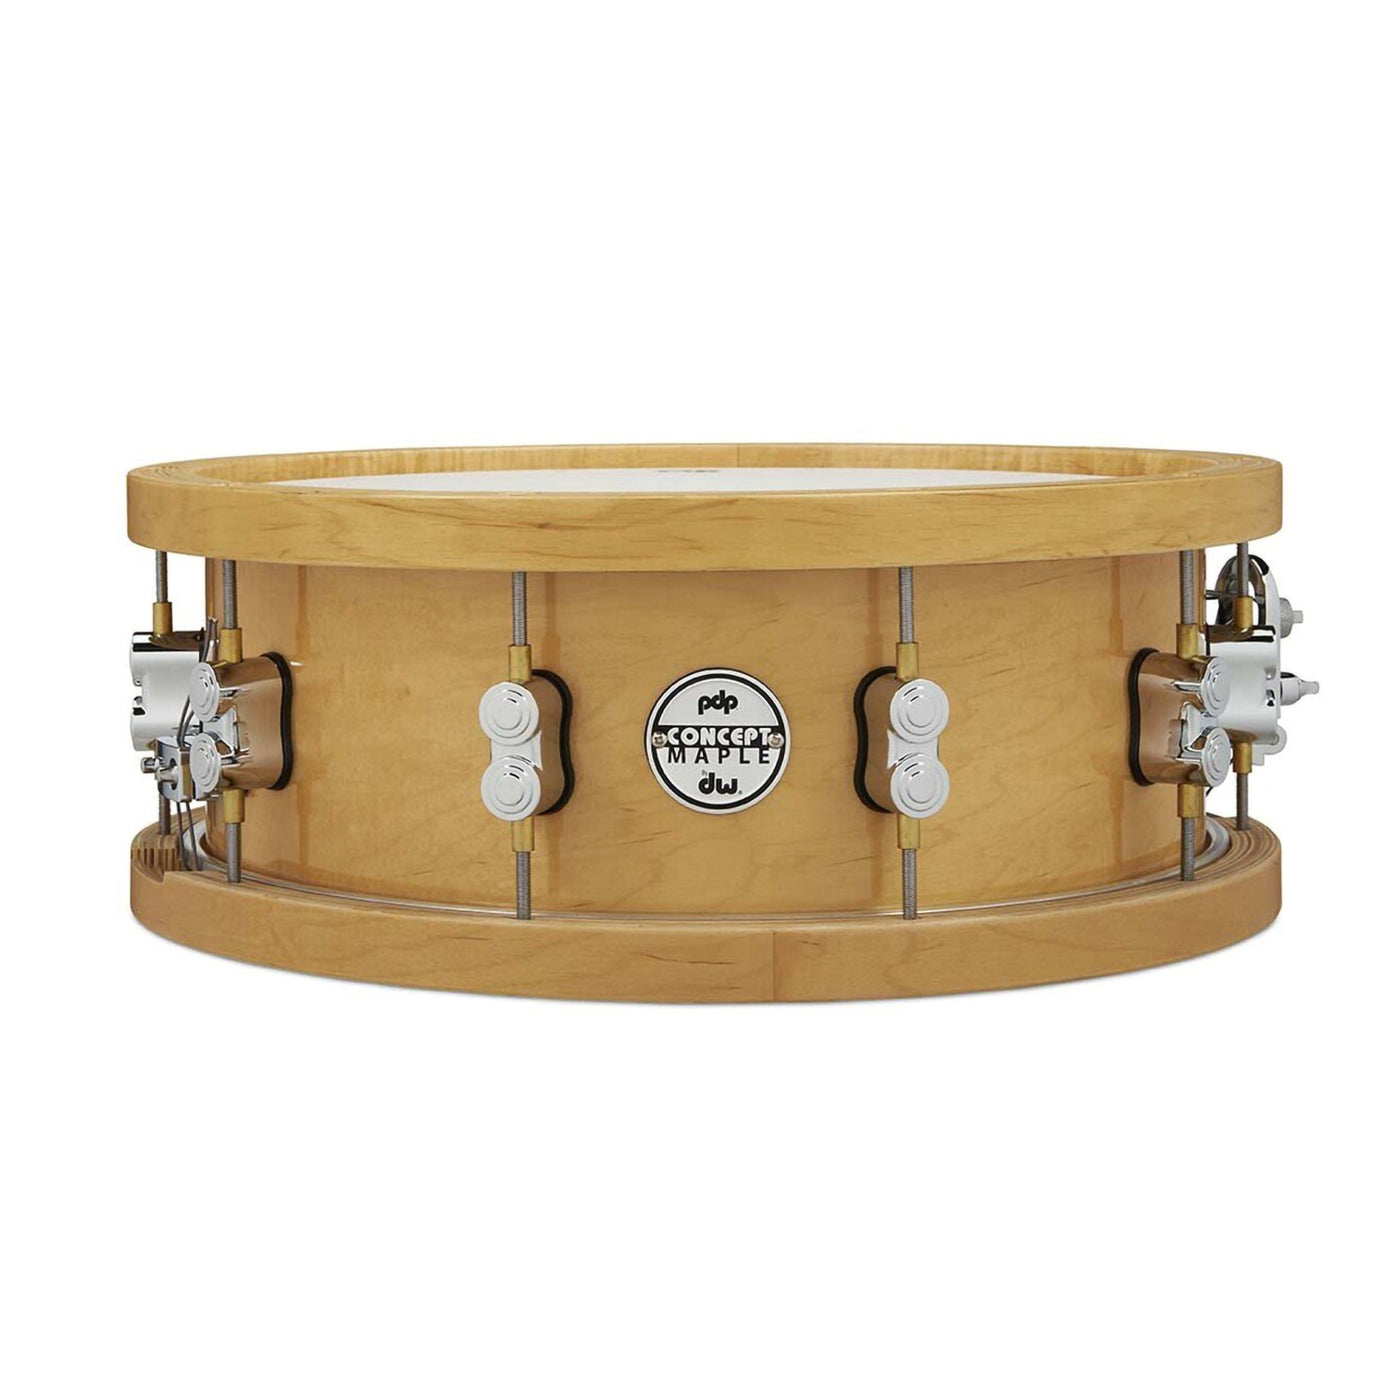 DW PDP Thick Wood Hoop Maple 5.5" X 14" Snare Drum